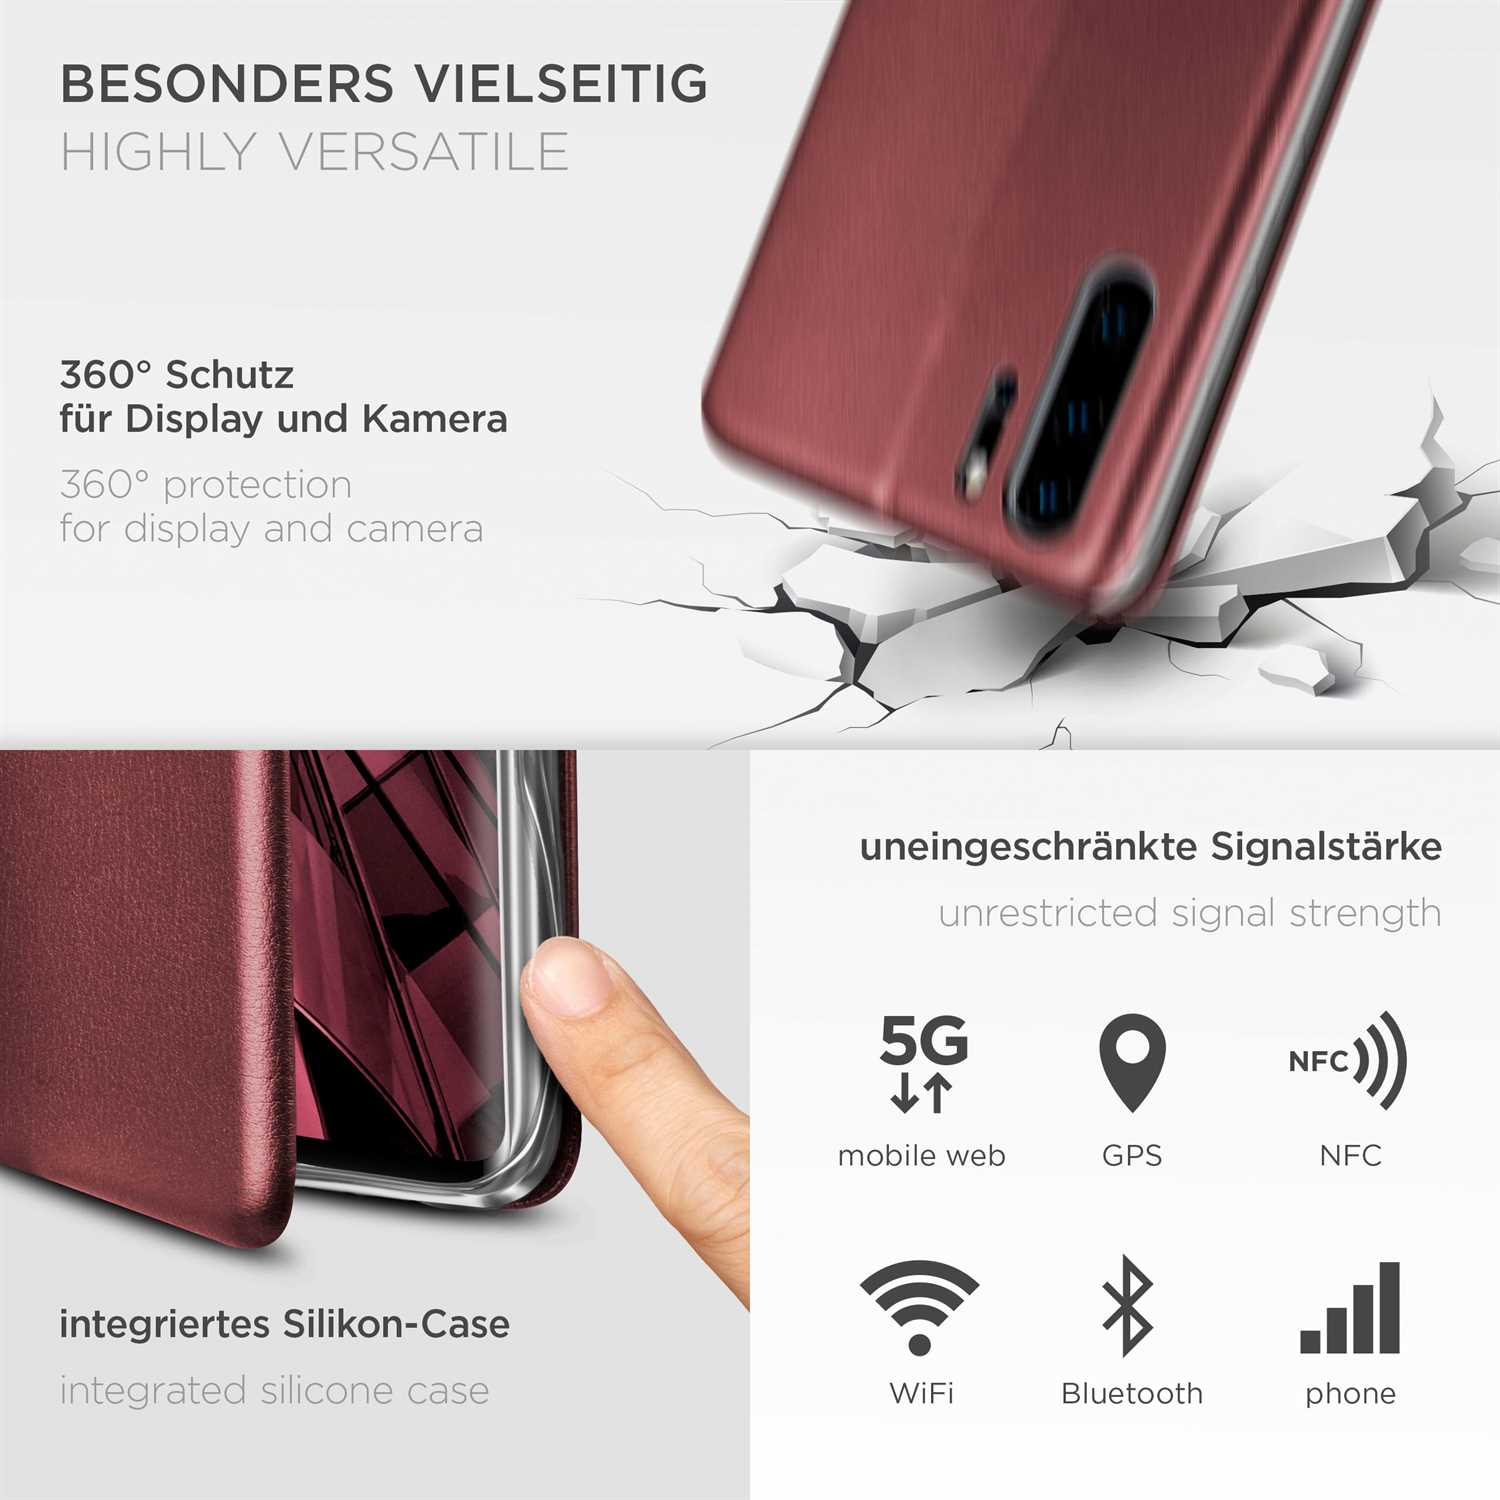 Pro P30 - Burgund Case, Edition, Flip New Business Cover, Huawei, ONEFLOW Red